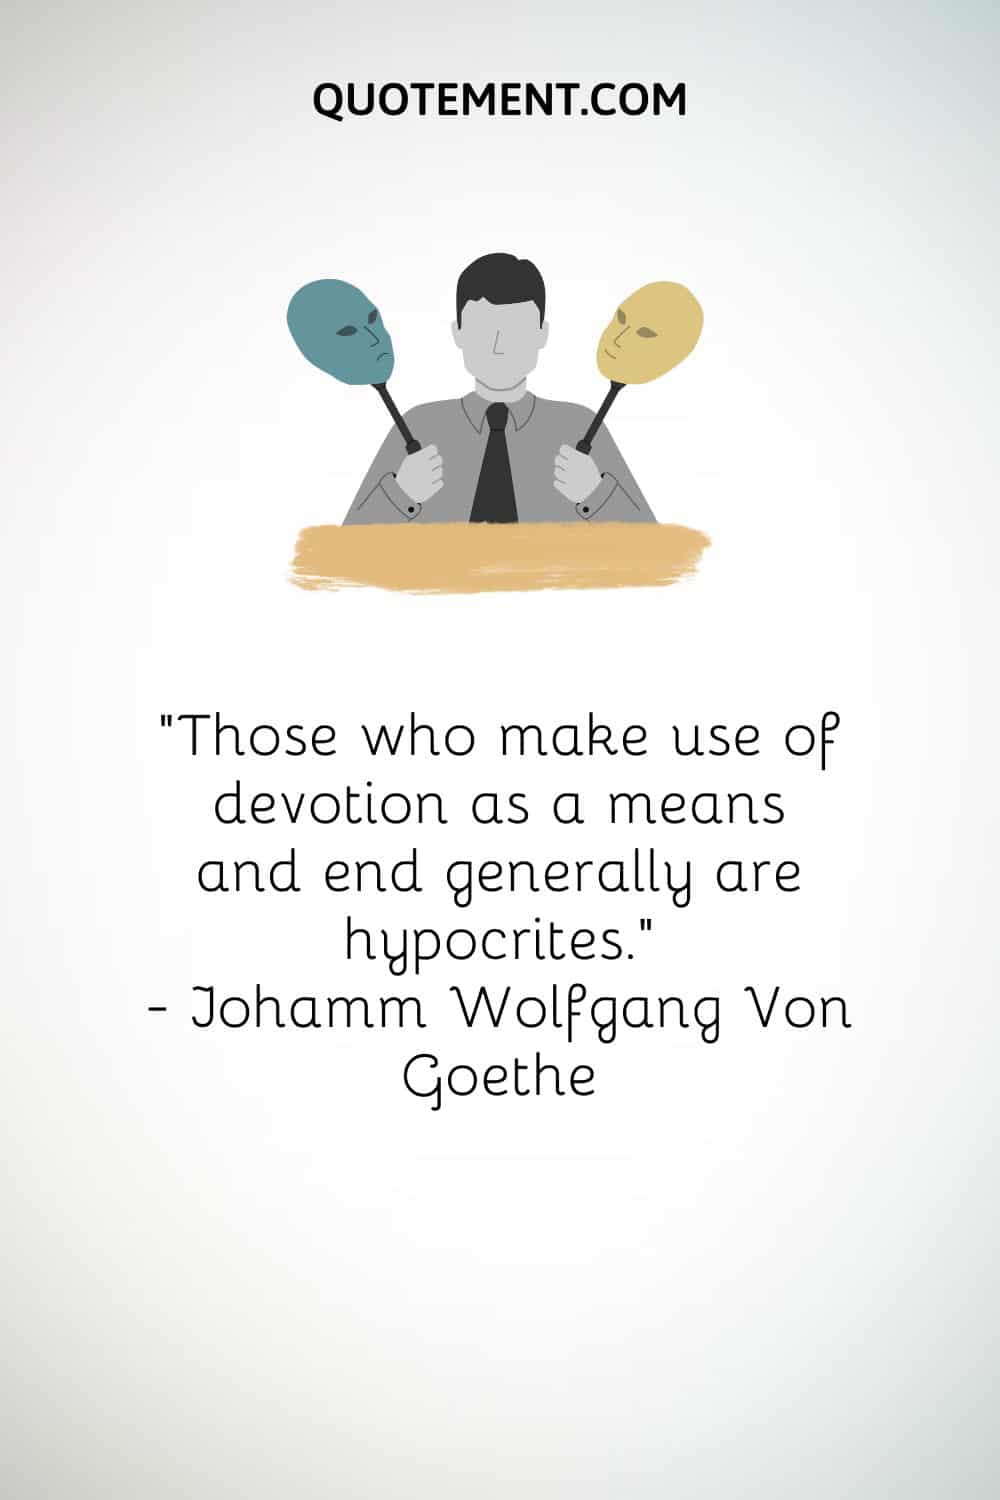 “Those who make use of devotion as a means and end generally are hypocrites.” — Johamm Wolfgang Von Goethe.